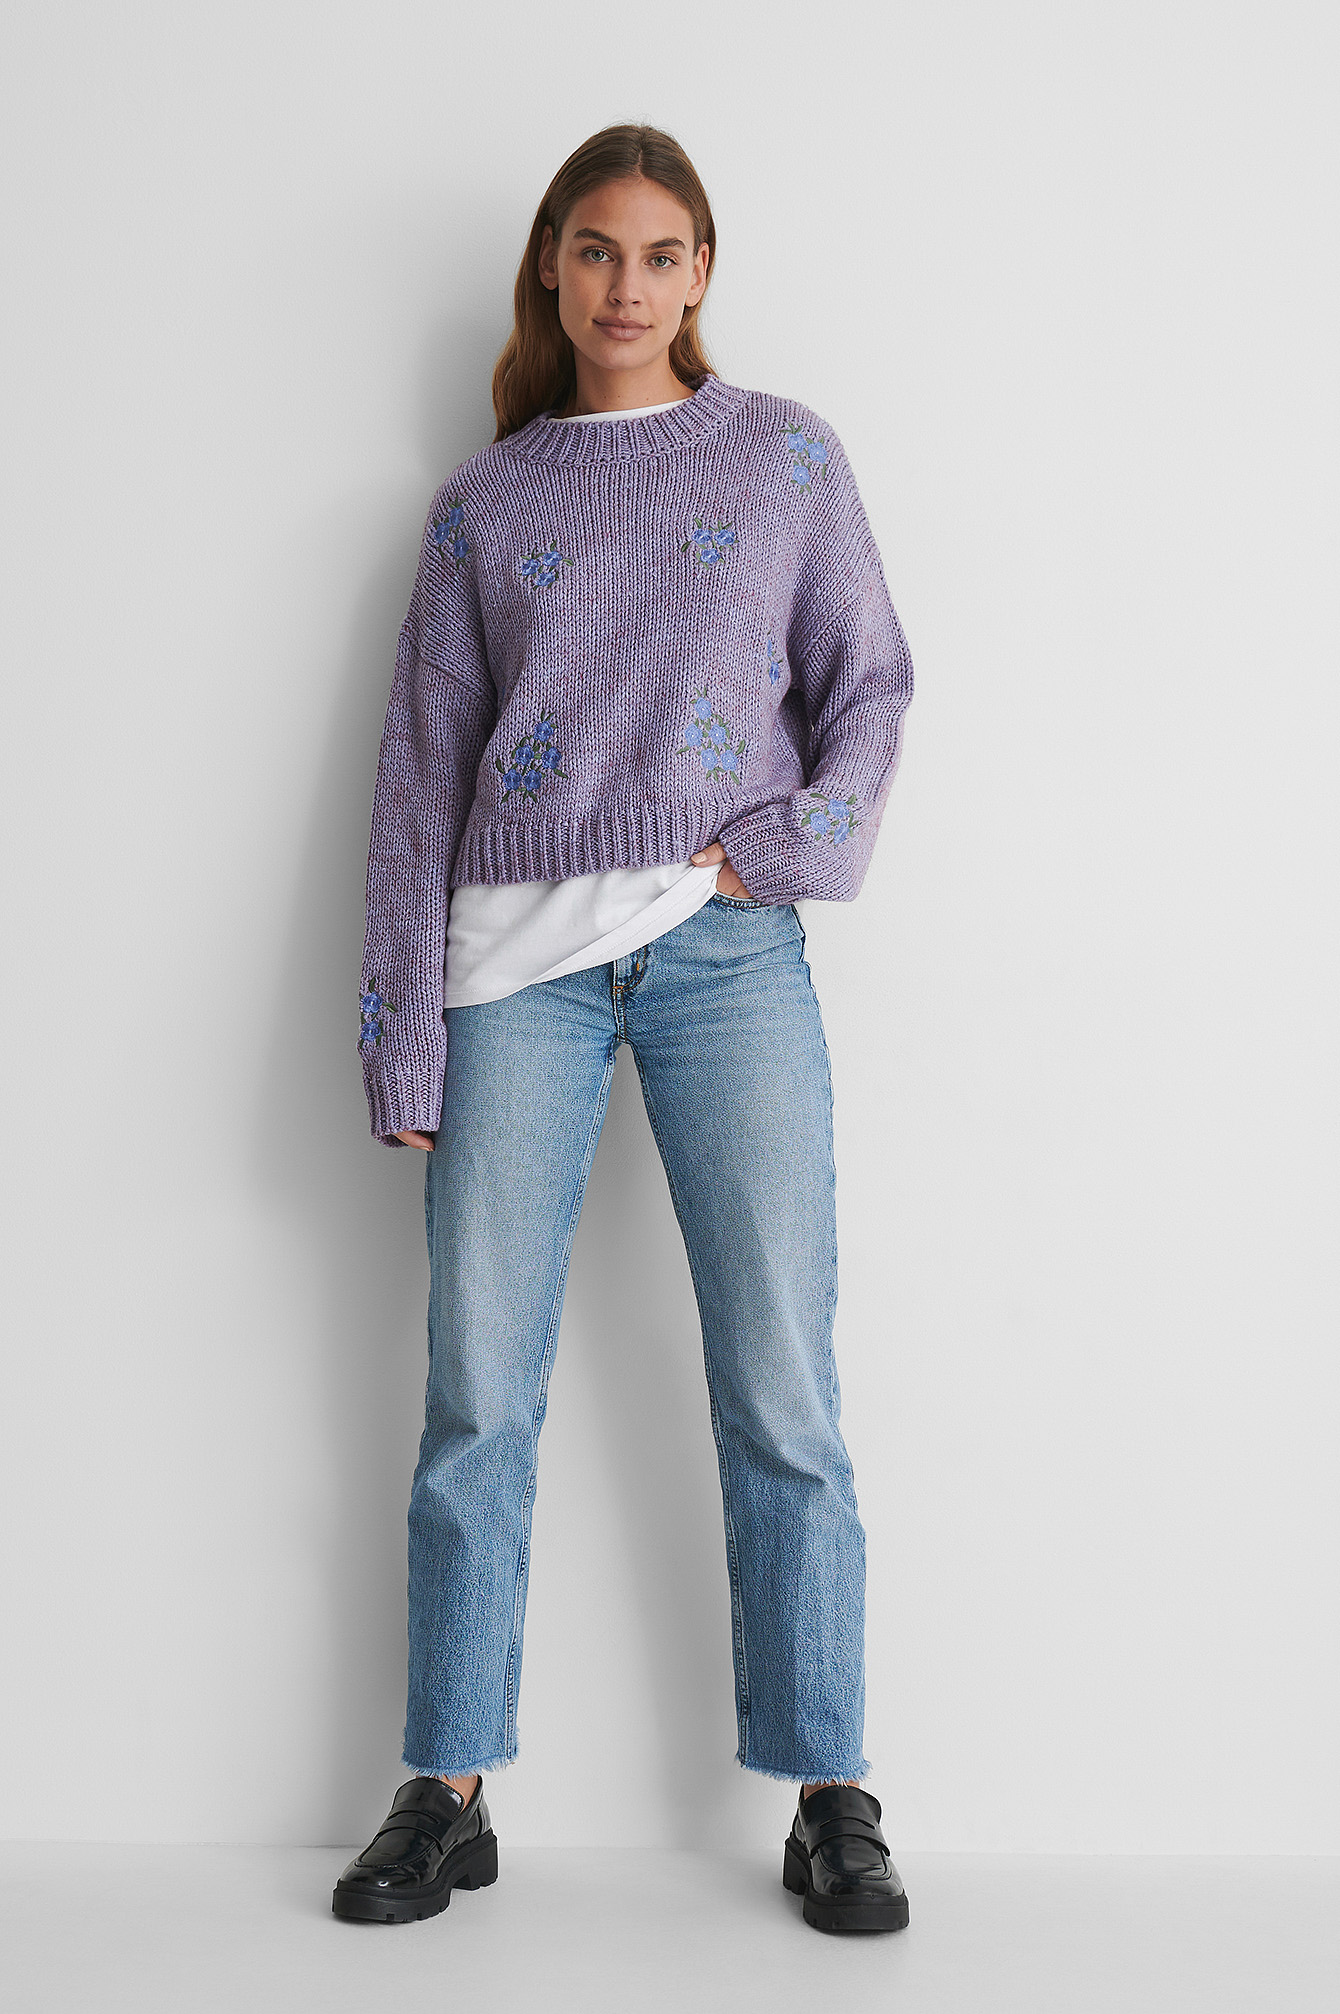 Flower Embroidery Round Neck Knitted Sweater with a White T-shirt and Jeans.